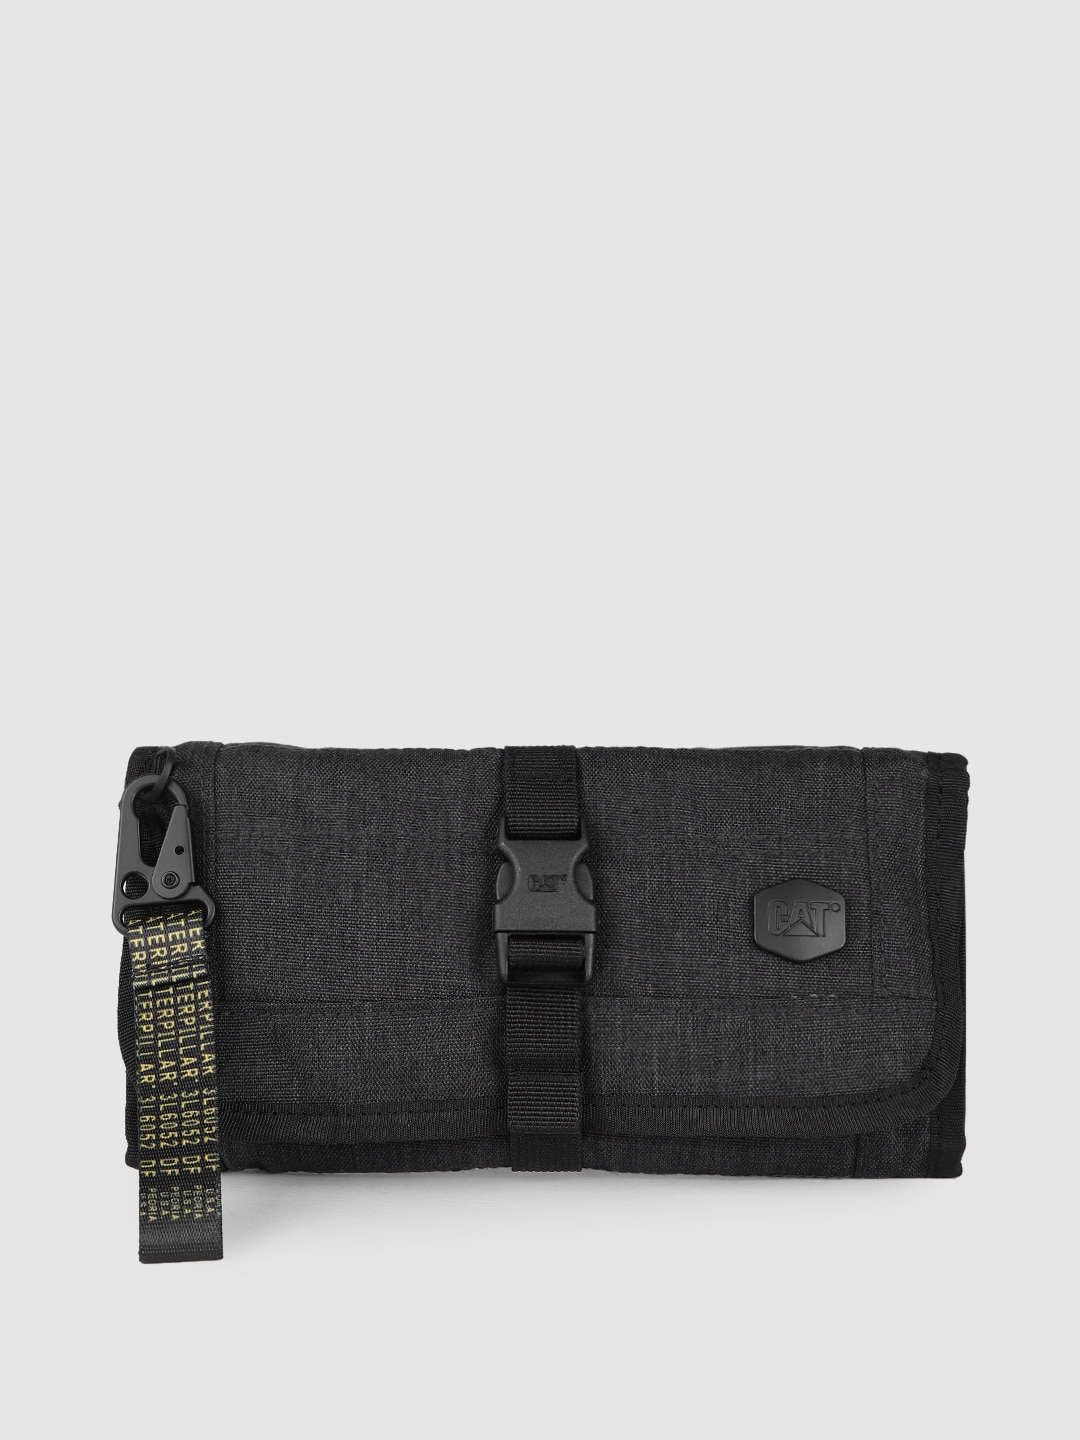 CAT Charcoal Black Solid Organizer Roll Pouch Price in India